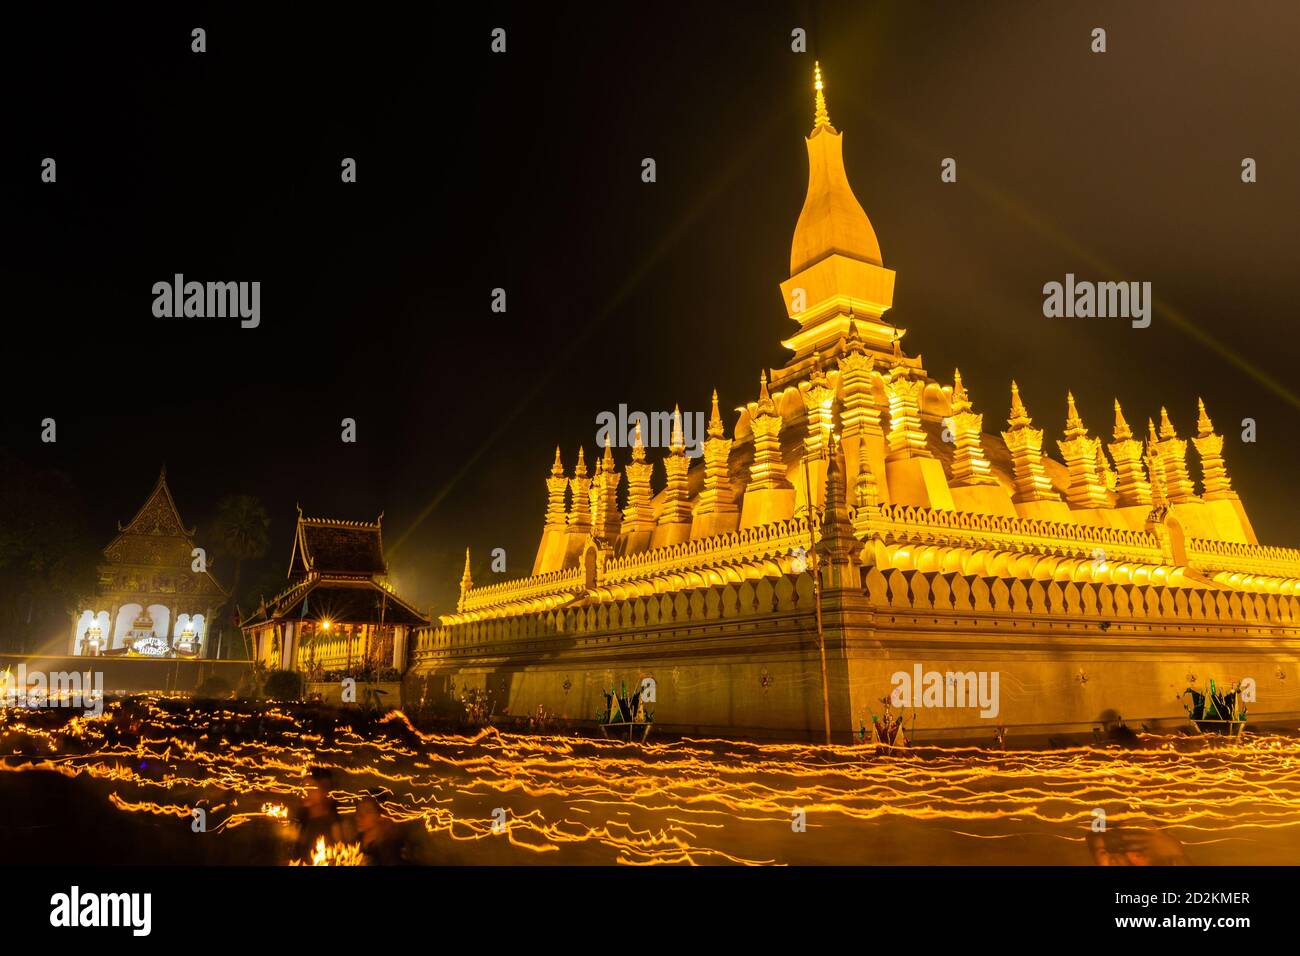 Vientiane, Laos. 11th Nov, 2019. People pray around the That Luang Stupa in Vientiane, Laos, on Nov. 11, 2019. Laos is the only landlocked country in Southeast Asia. In the central part of the country, the capital Vientiane is located on the alluvial plain on the Mekong River, suitable for fishing and plantation. The Lan Xang Kingdom, the first unified multi-ethnic nation in the history of Laos, moved its capital to Vientiane in the mid-16th century, and Vientiane gradually prospered. Credit: Kaikeo Saiyasane/Xinhua/Alamy Live News Stock Photo